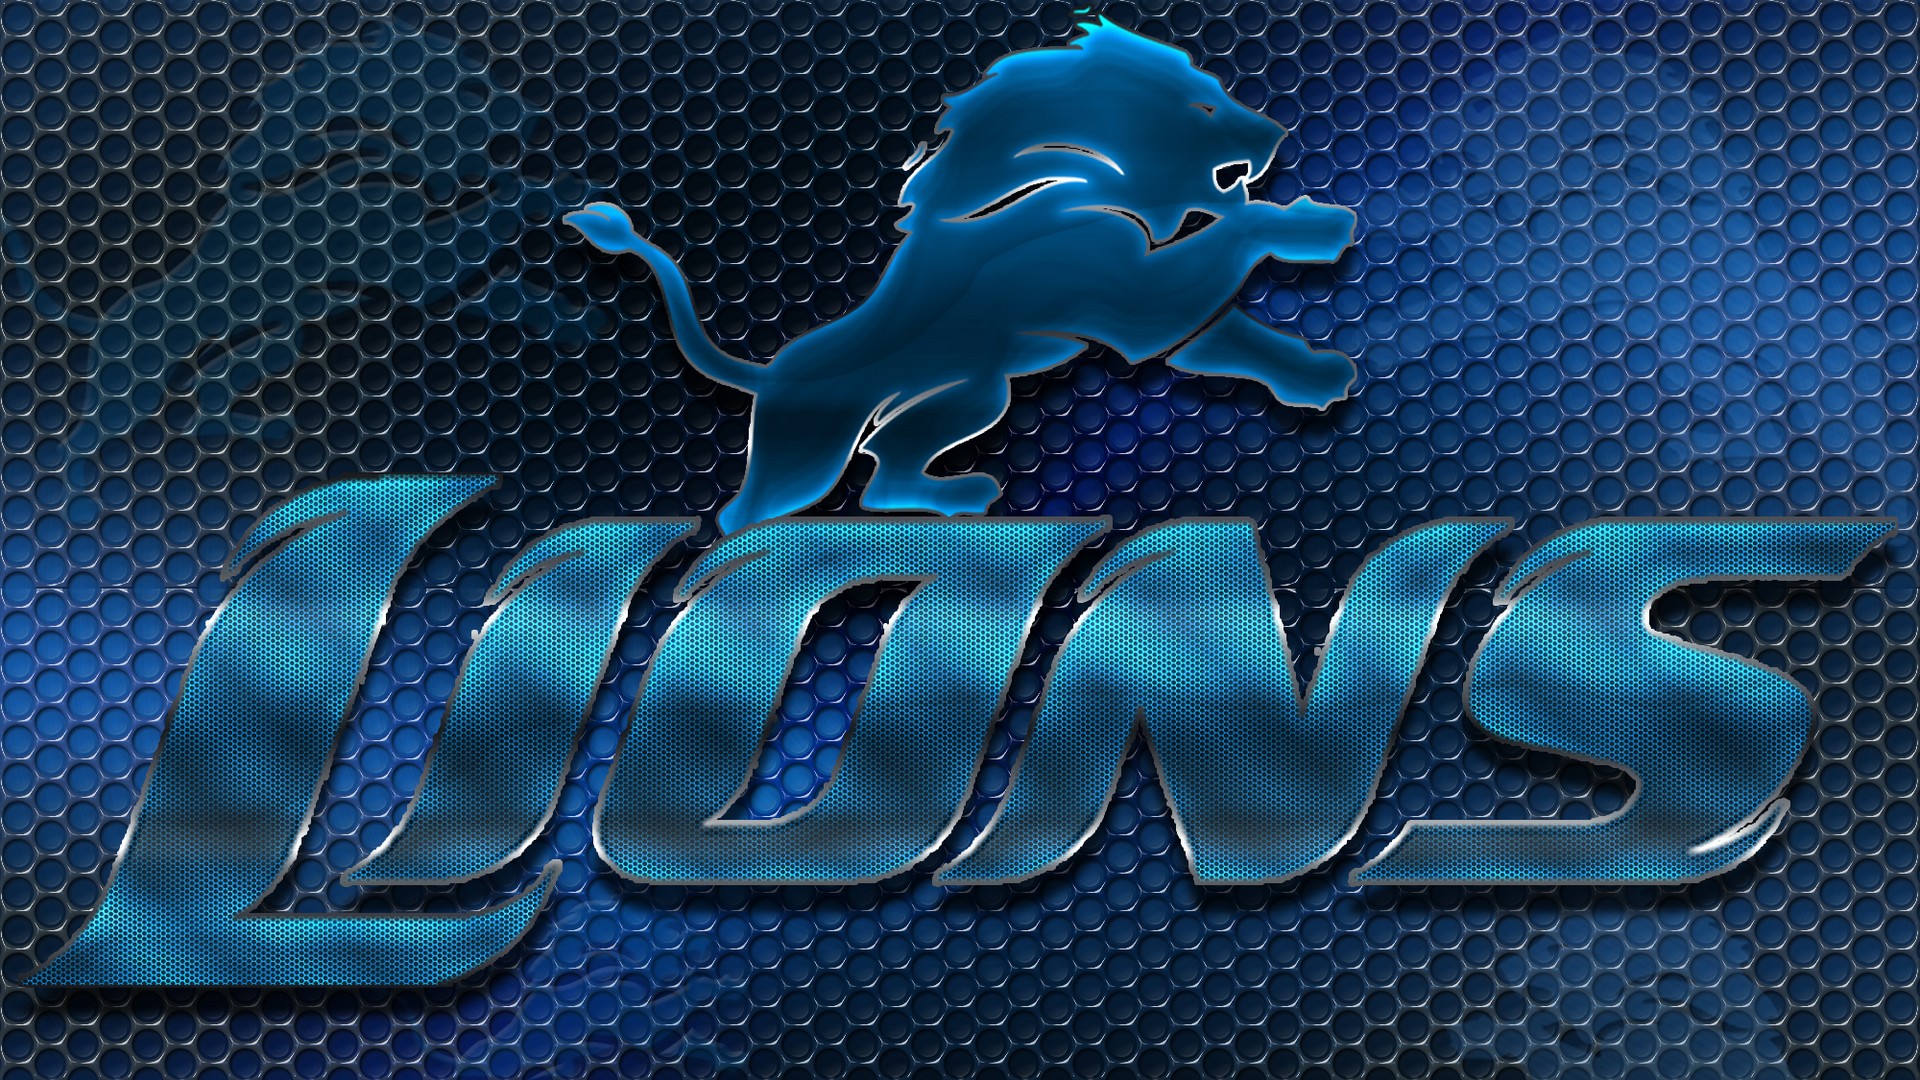 Wallpapers HD Detroit Lions NFL with high-resolution 1920x1080 pixel. You can use this wallpaper for your Mac or Windows Desktop Background, iPhone, Android or Tablet and another Smartphone device